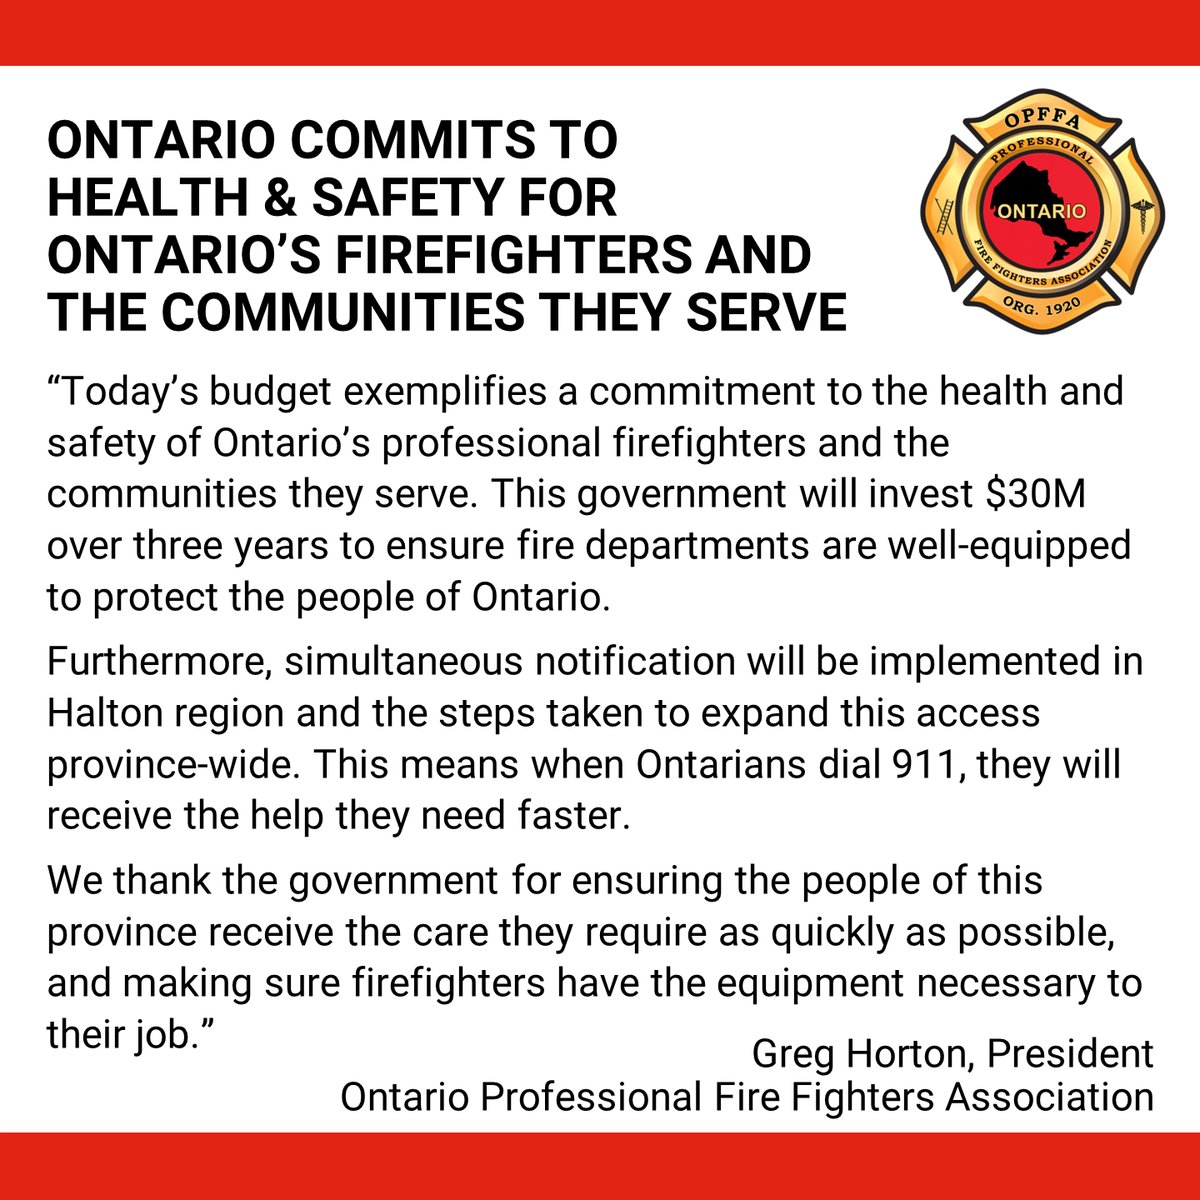 #firefighters do more than fight fires. Strategically situated fire stations=timely emergency response 24/7 365 days/yr. Simultaneous notification=faster response times. Thank you @fordnation @MPPKerzner @DavidPiccini for putting the health & safety of Ontarians first #ONpoli